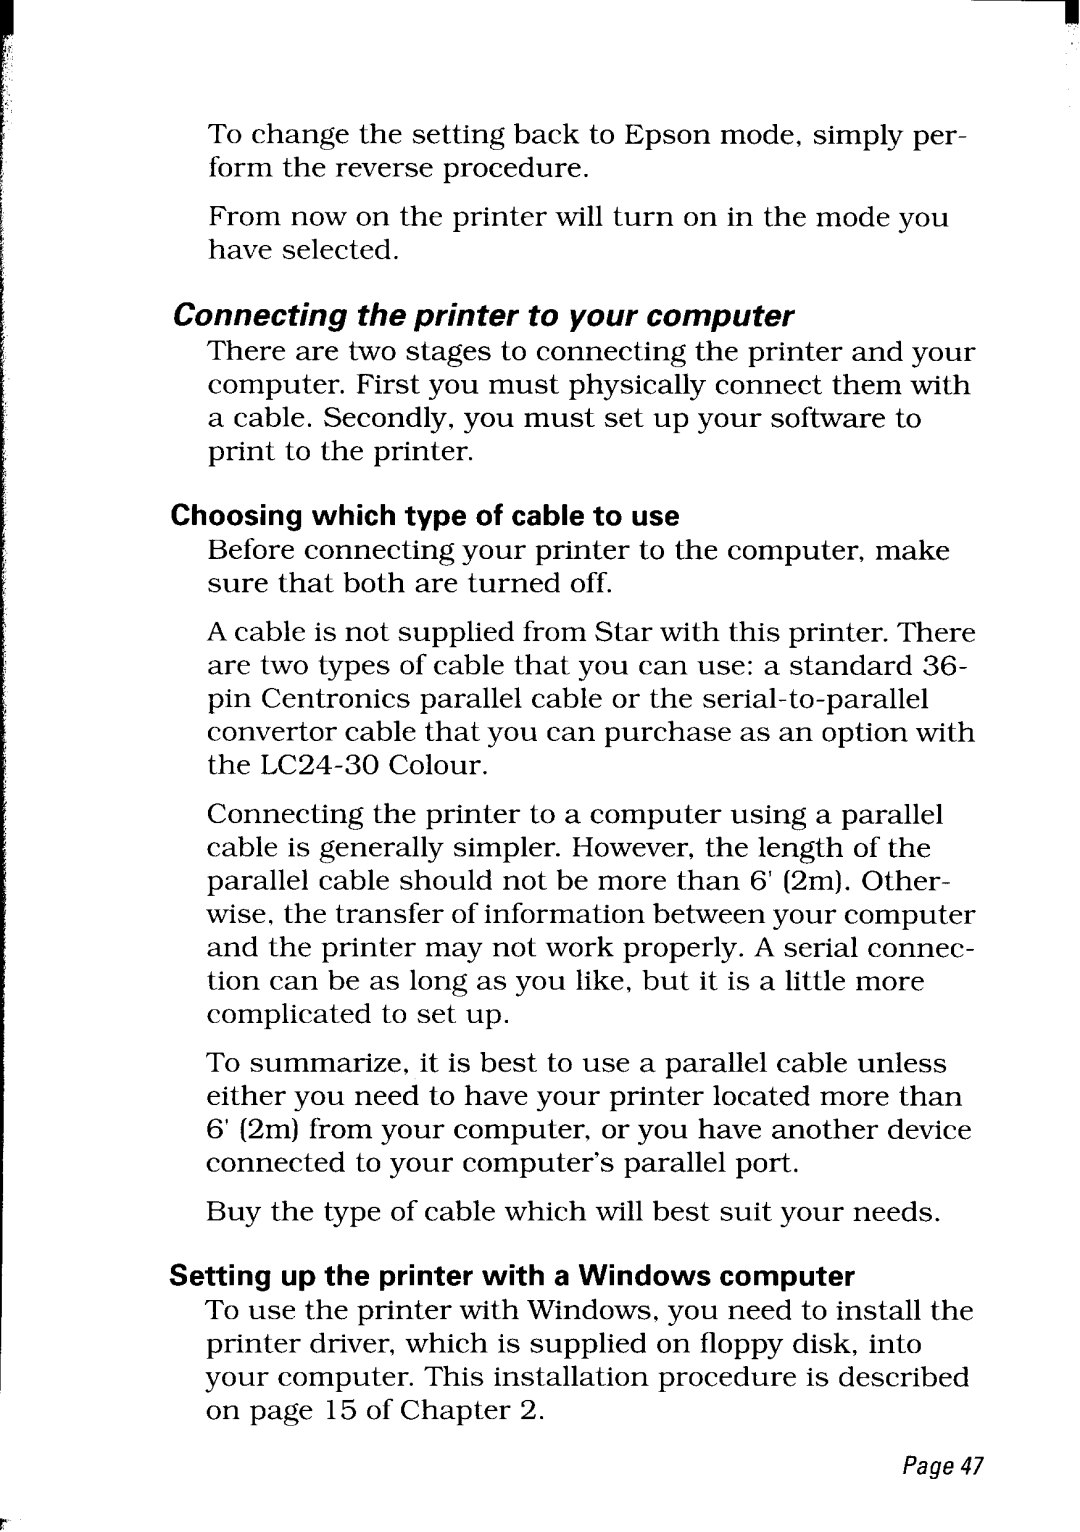 Star Micronics LC24-30 user manual Choosing which type of cable to use, Setting up the printer with a Windows computer 